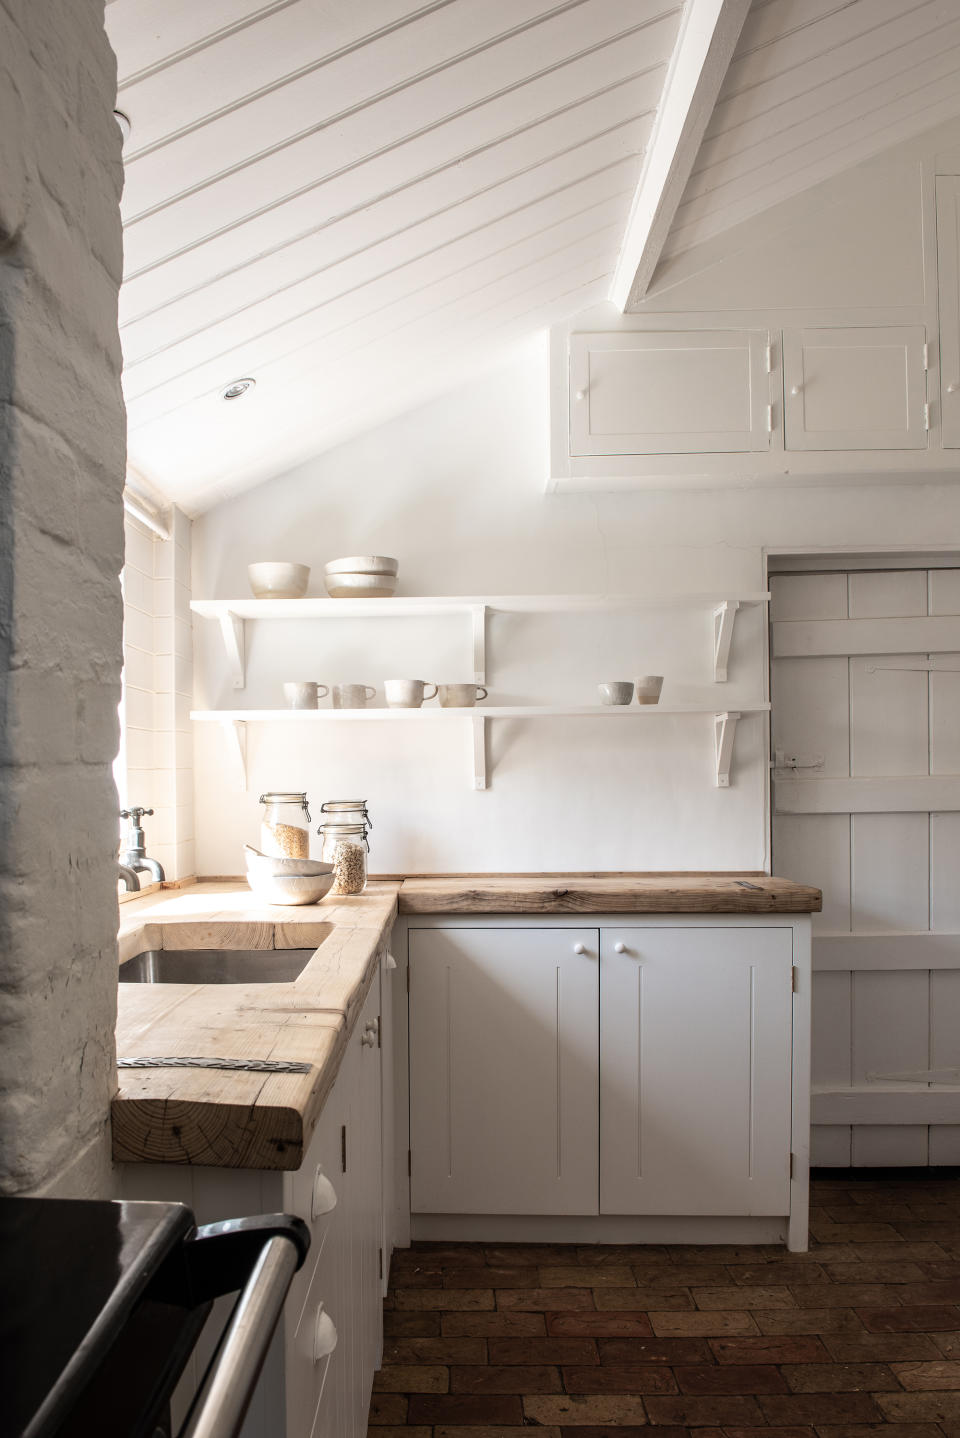 wooden worktops on white kitchen with open shelving